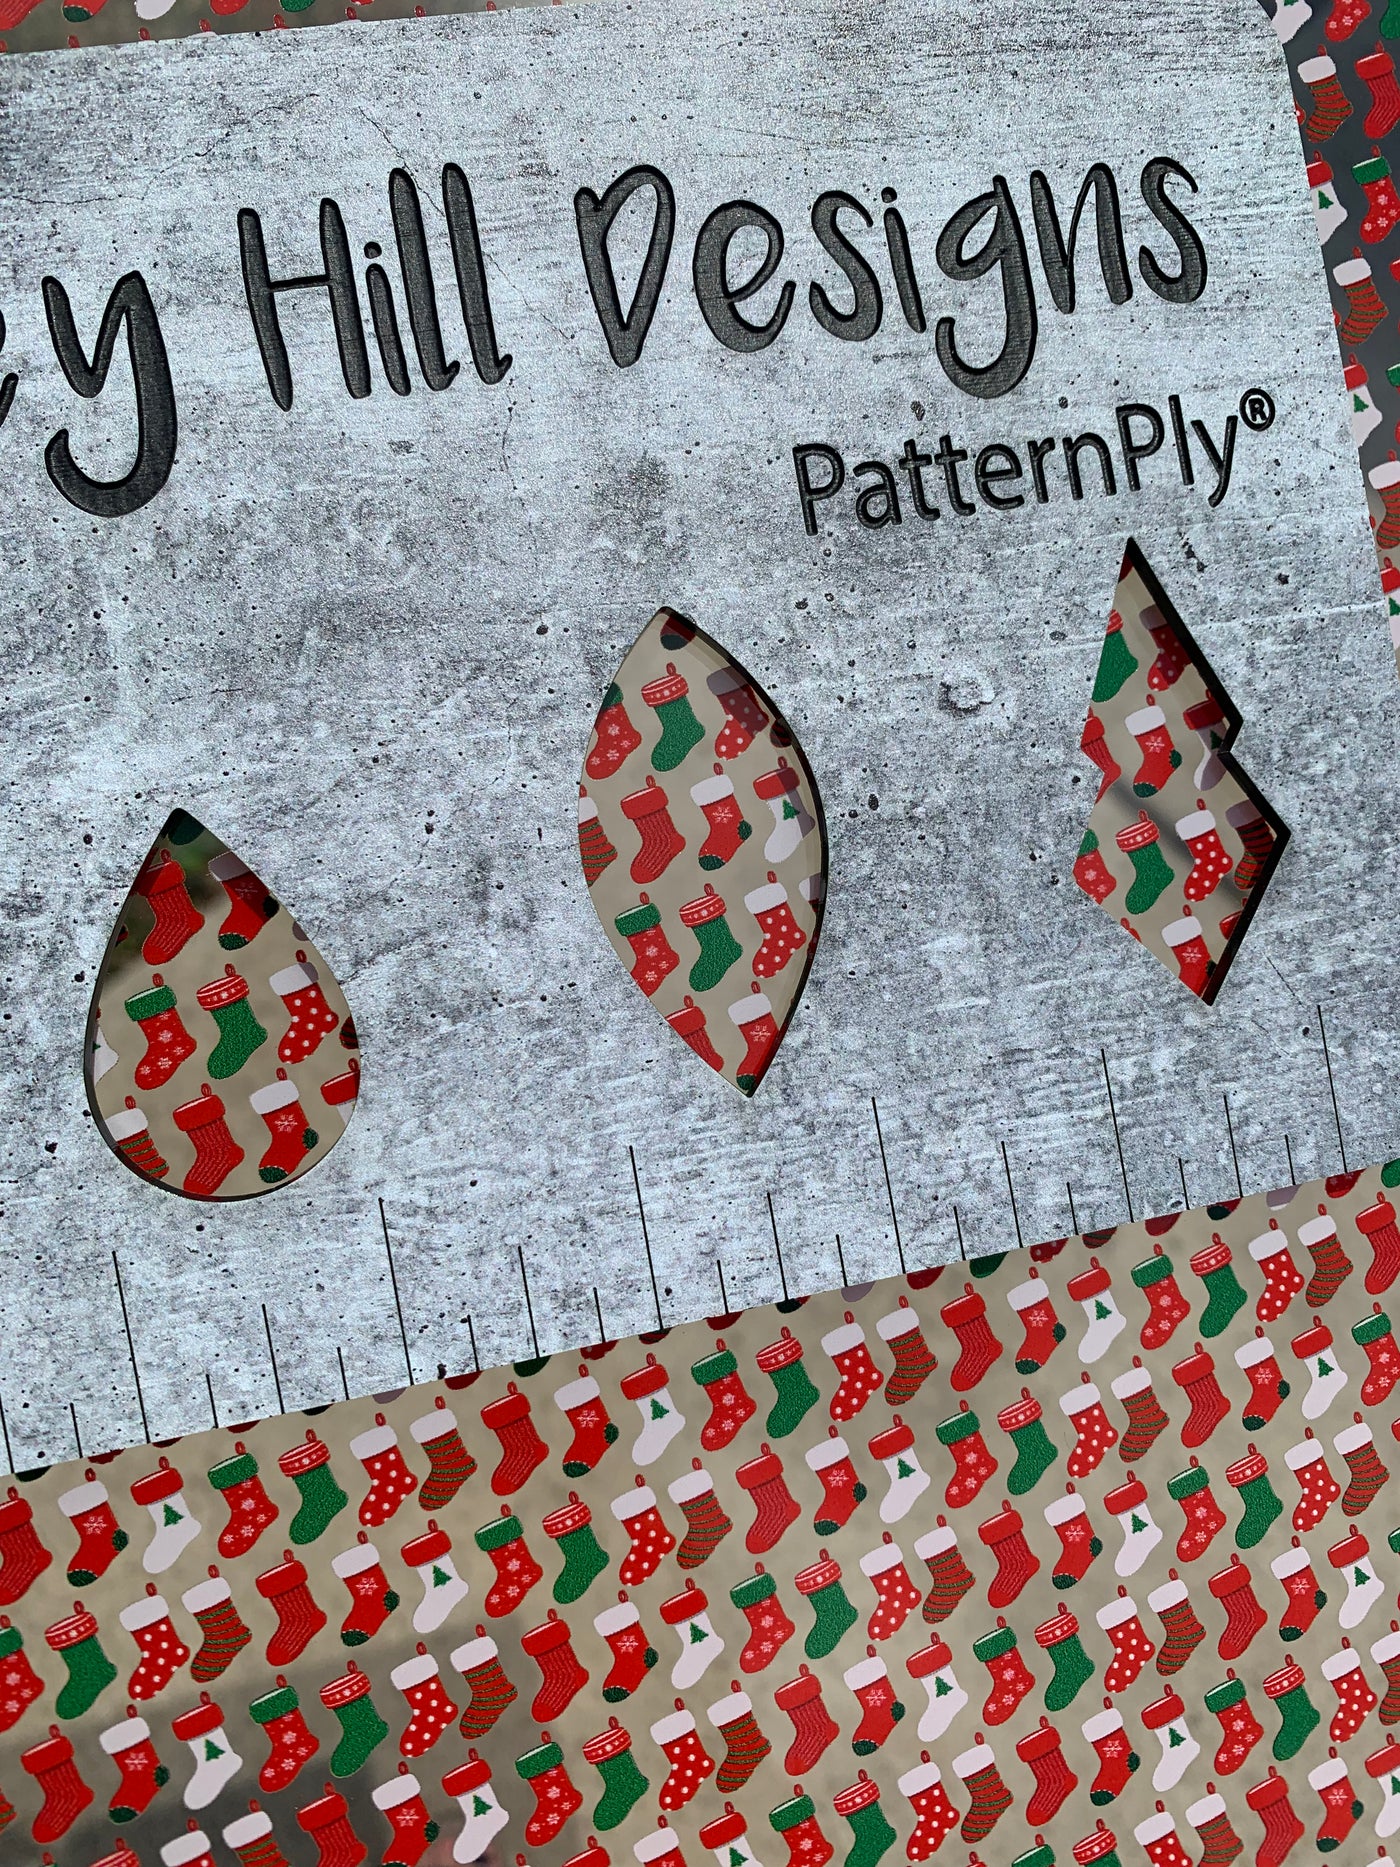 PatternPly® Scattered Christmas Stockings